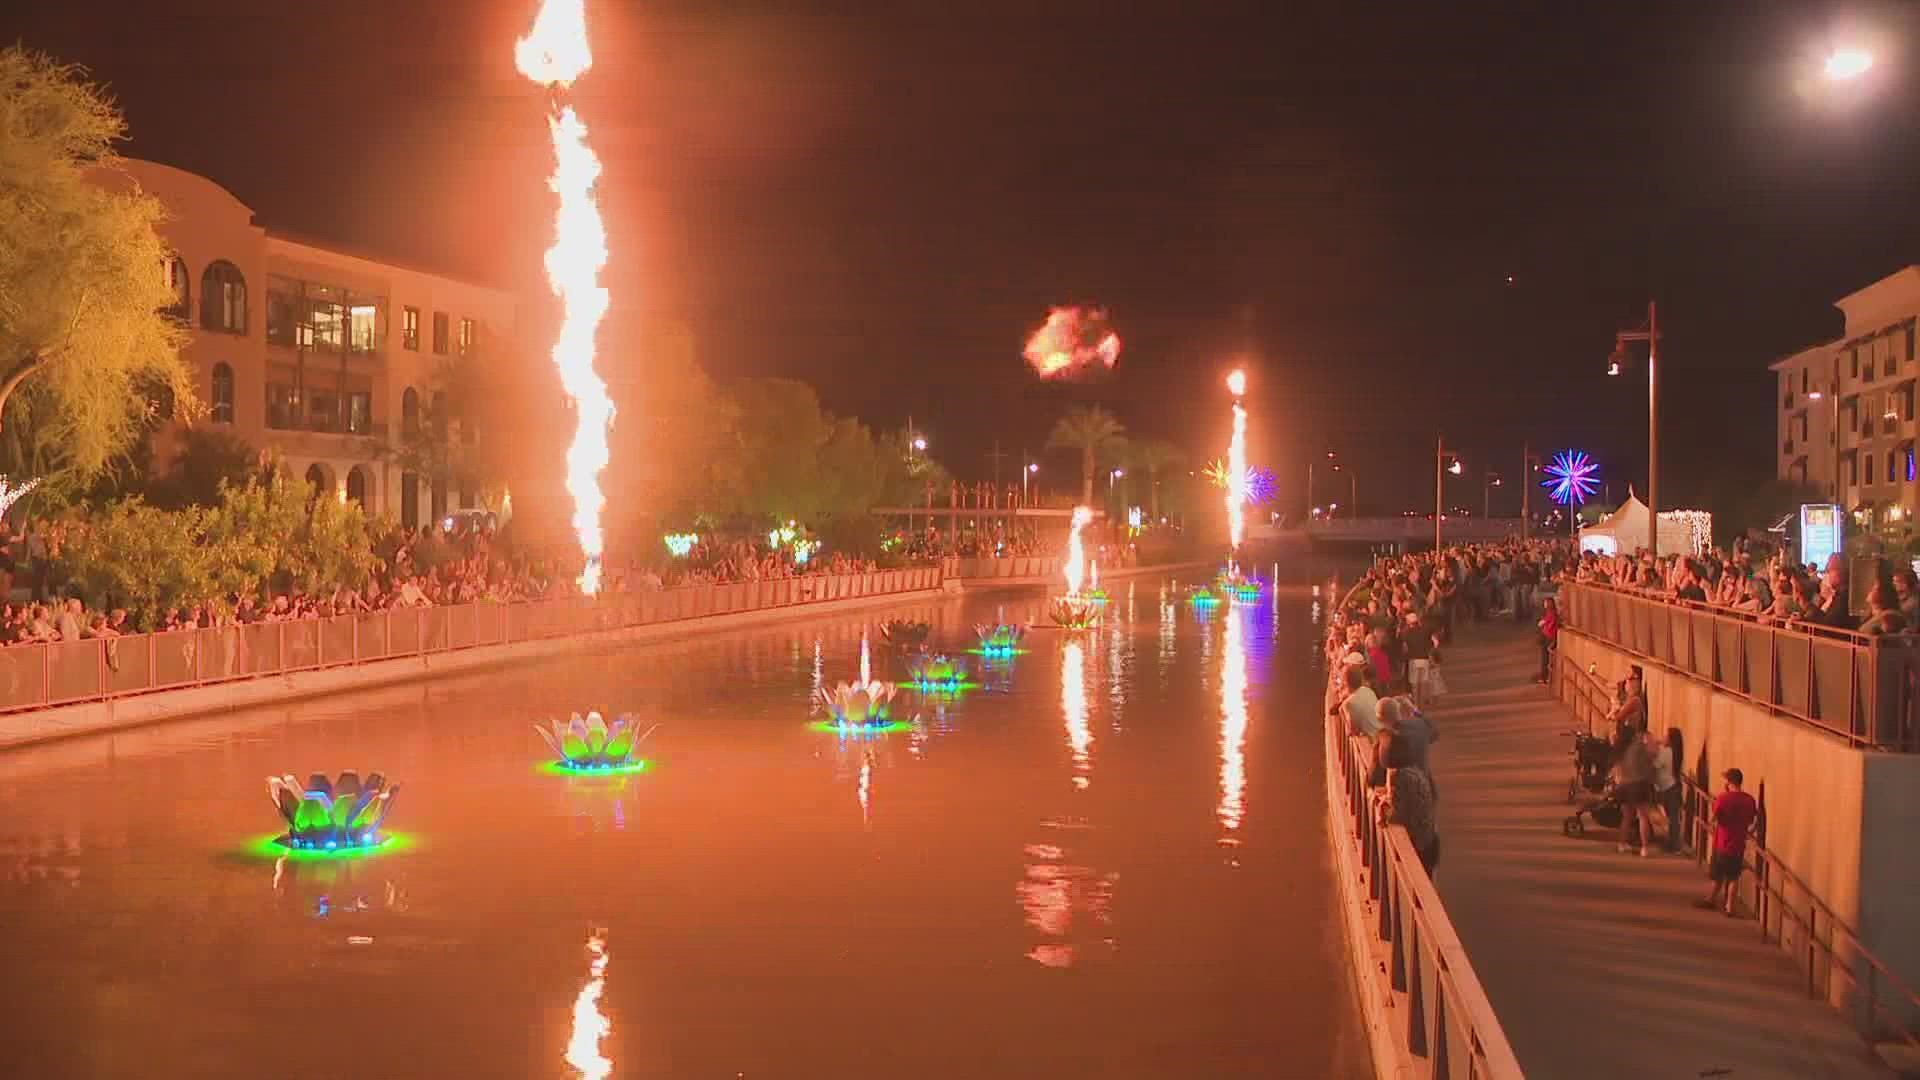 Final preparations are underway for the upcoming "Canal Convergence" event in Scottsdale. Jen Wahl has details on what to expect from this year's festival.